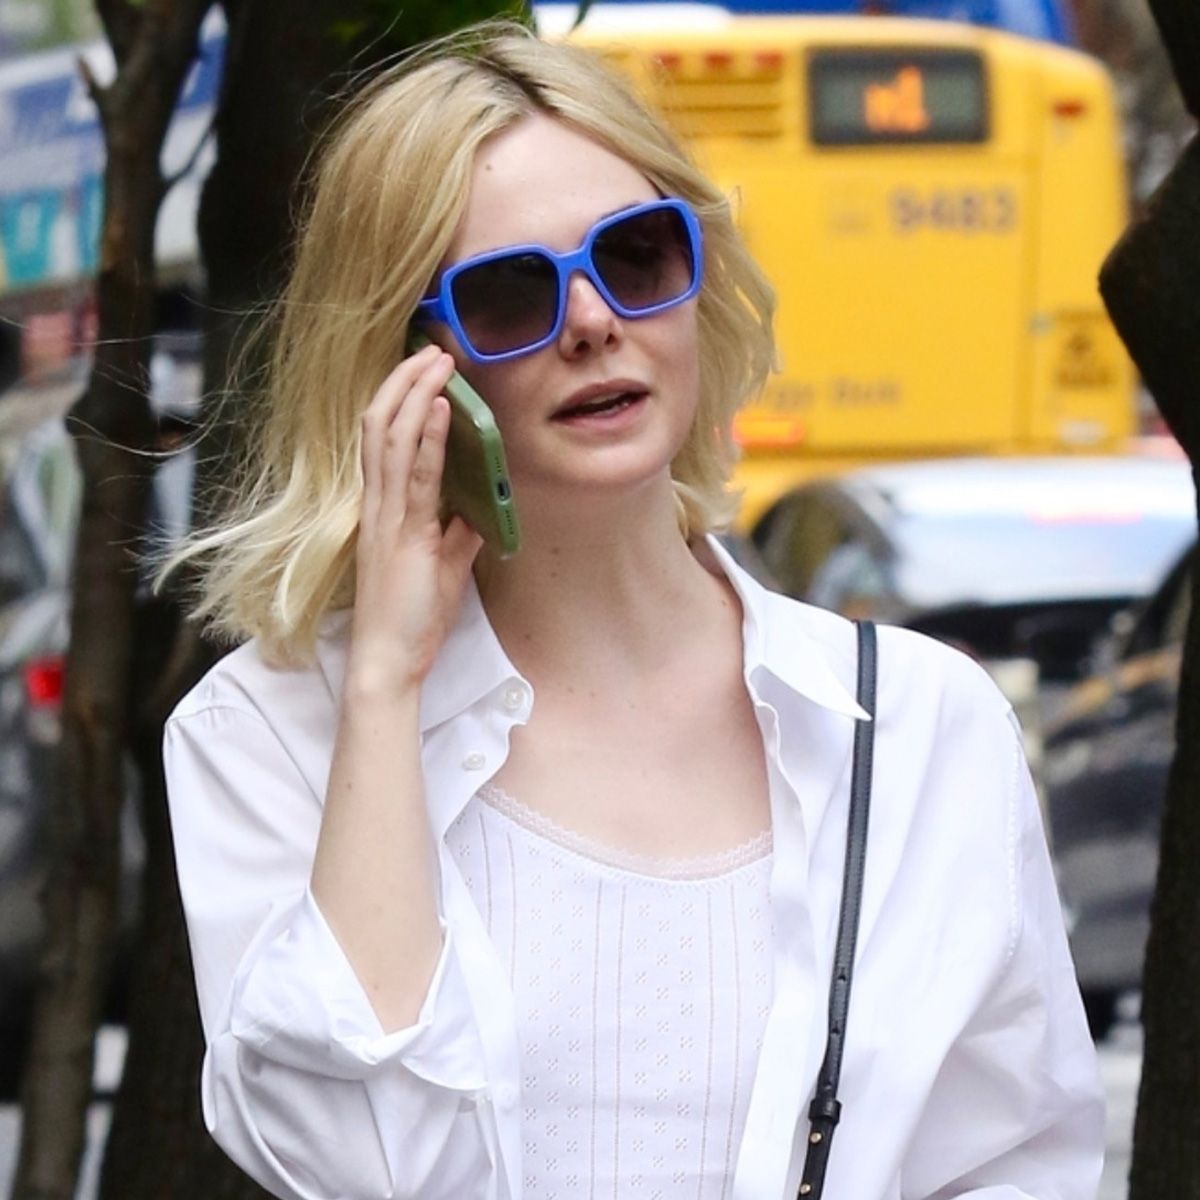 Elle Fanning Wore Spring's Most Unexpected Shoe Trend With Cuffed Jeans